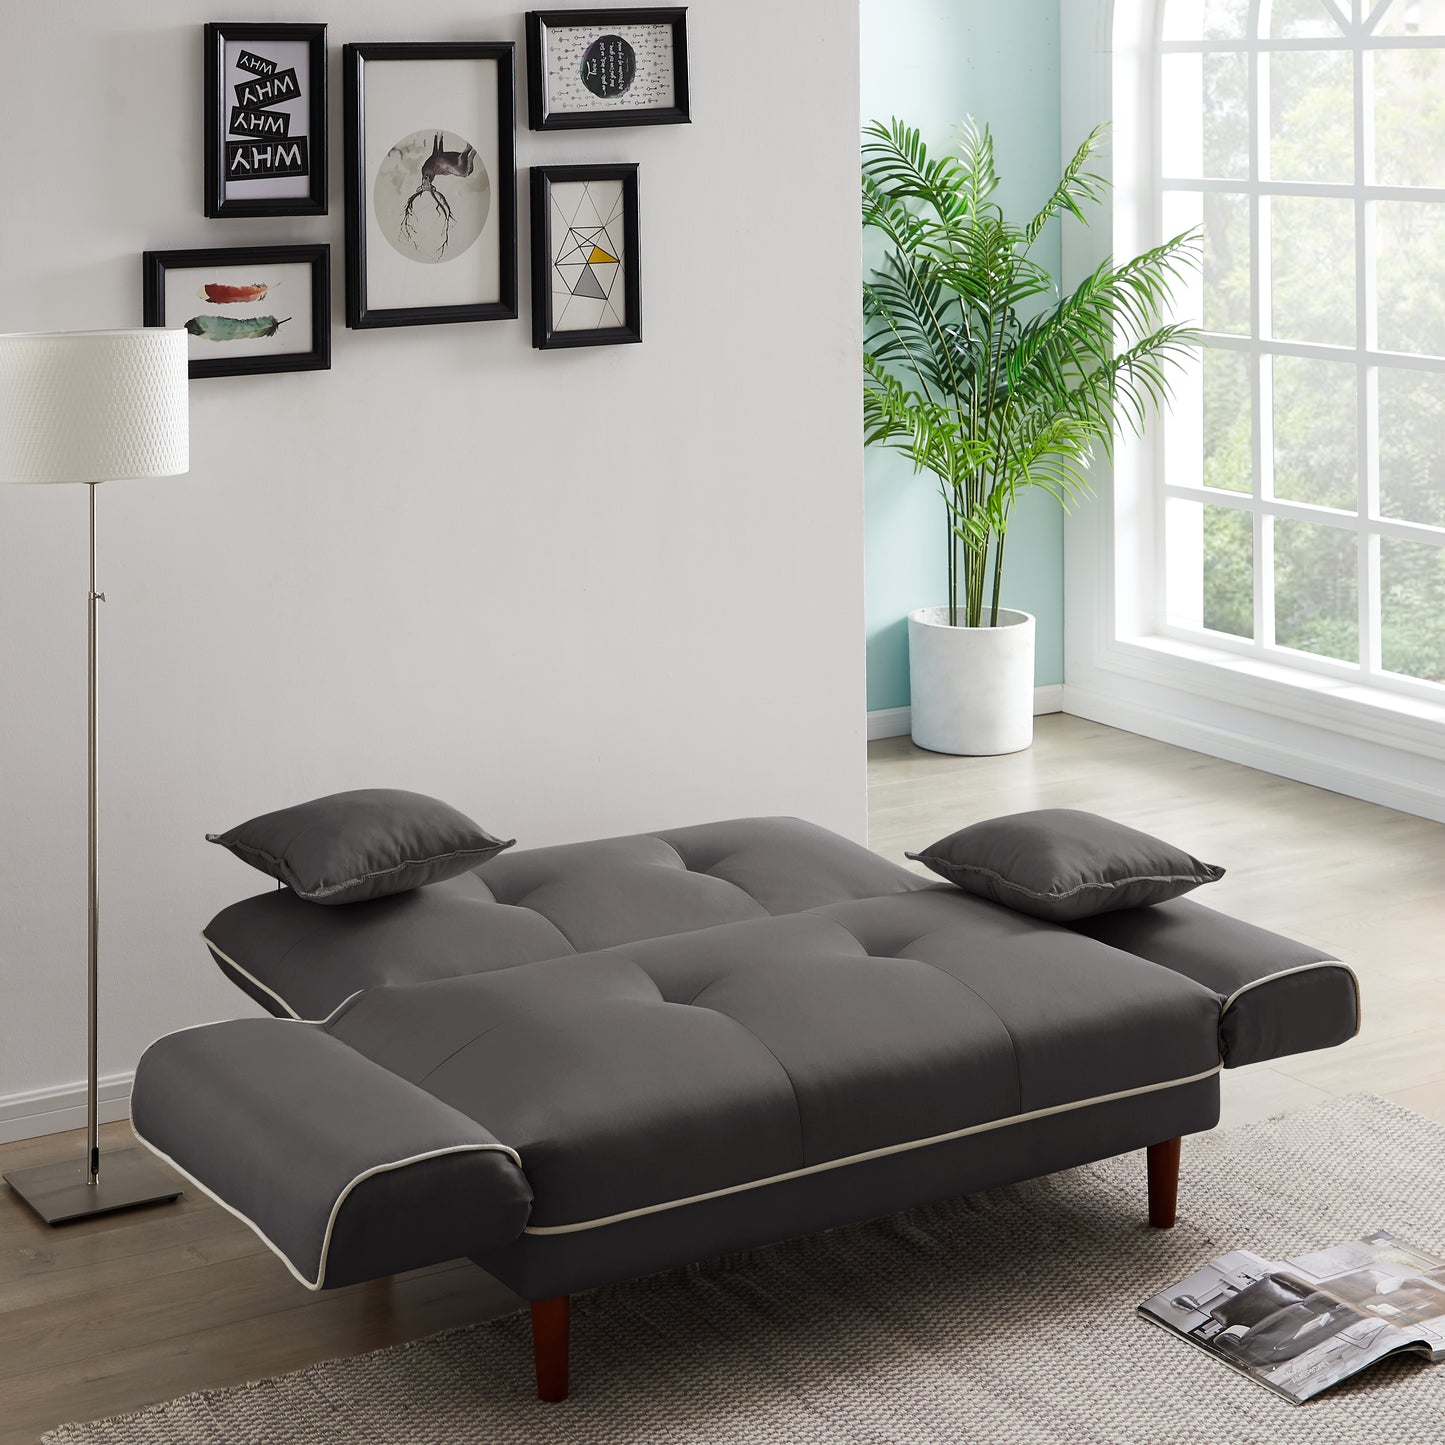 Elledge Upholstered Sleeper Sofa with pillows